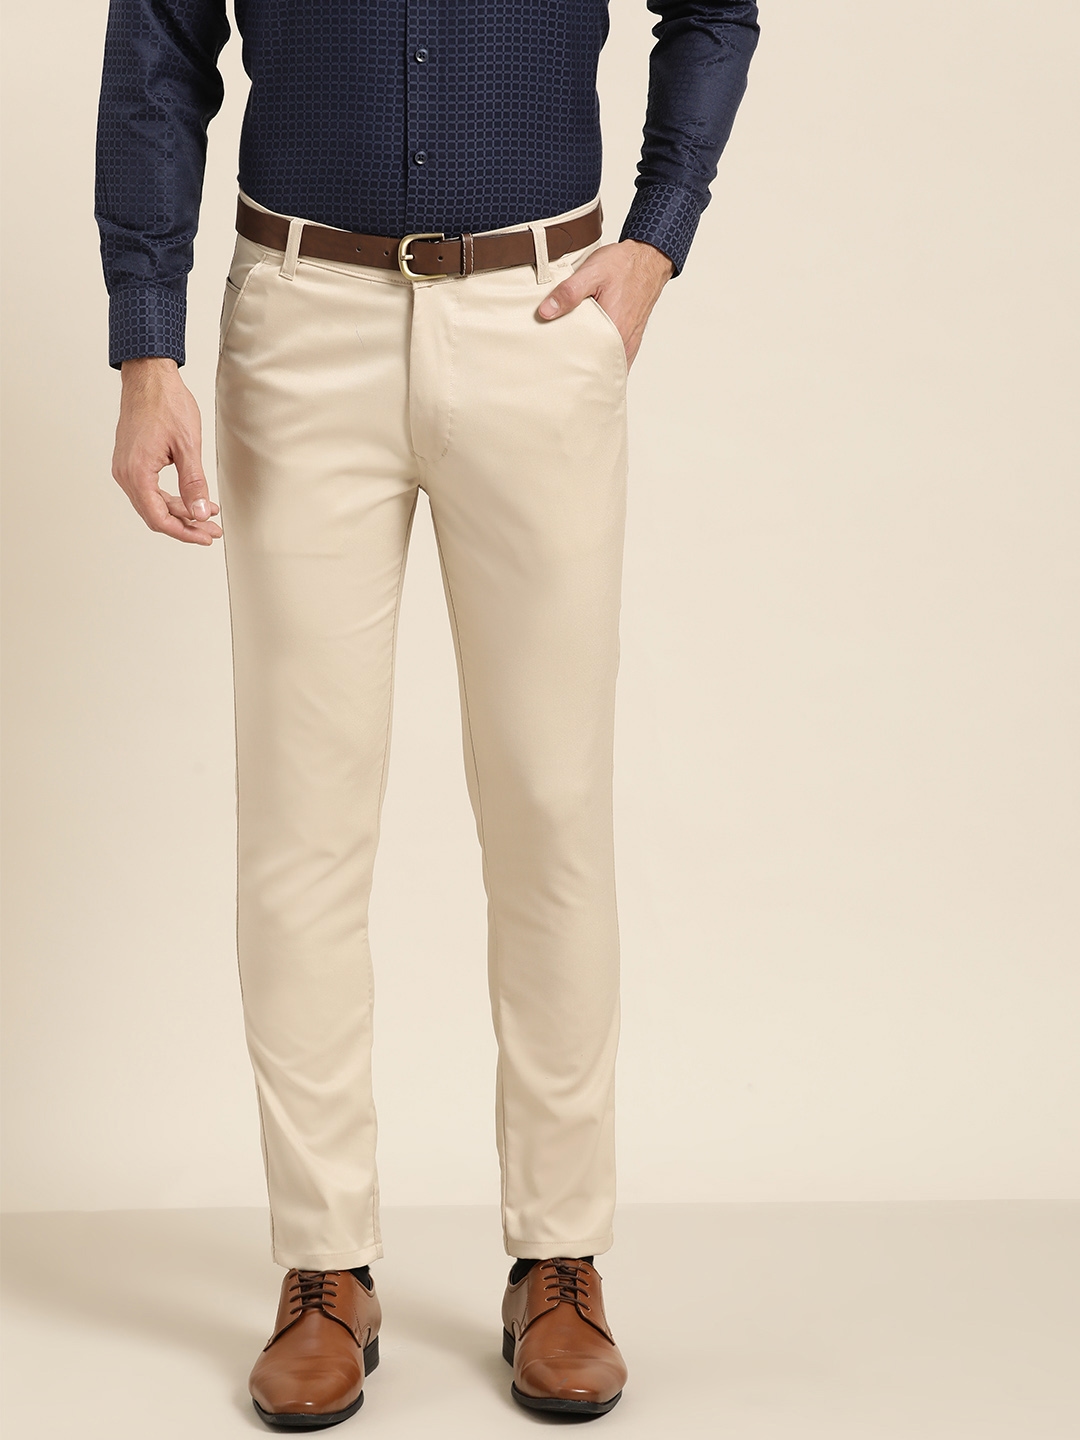 Aggregate more than 149 wrinkle free formal trousers best